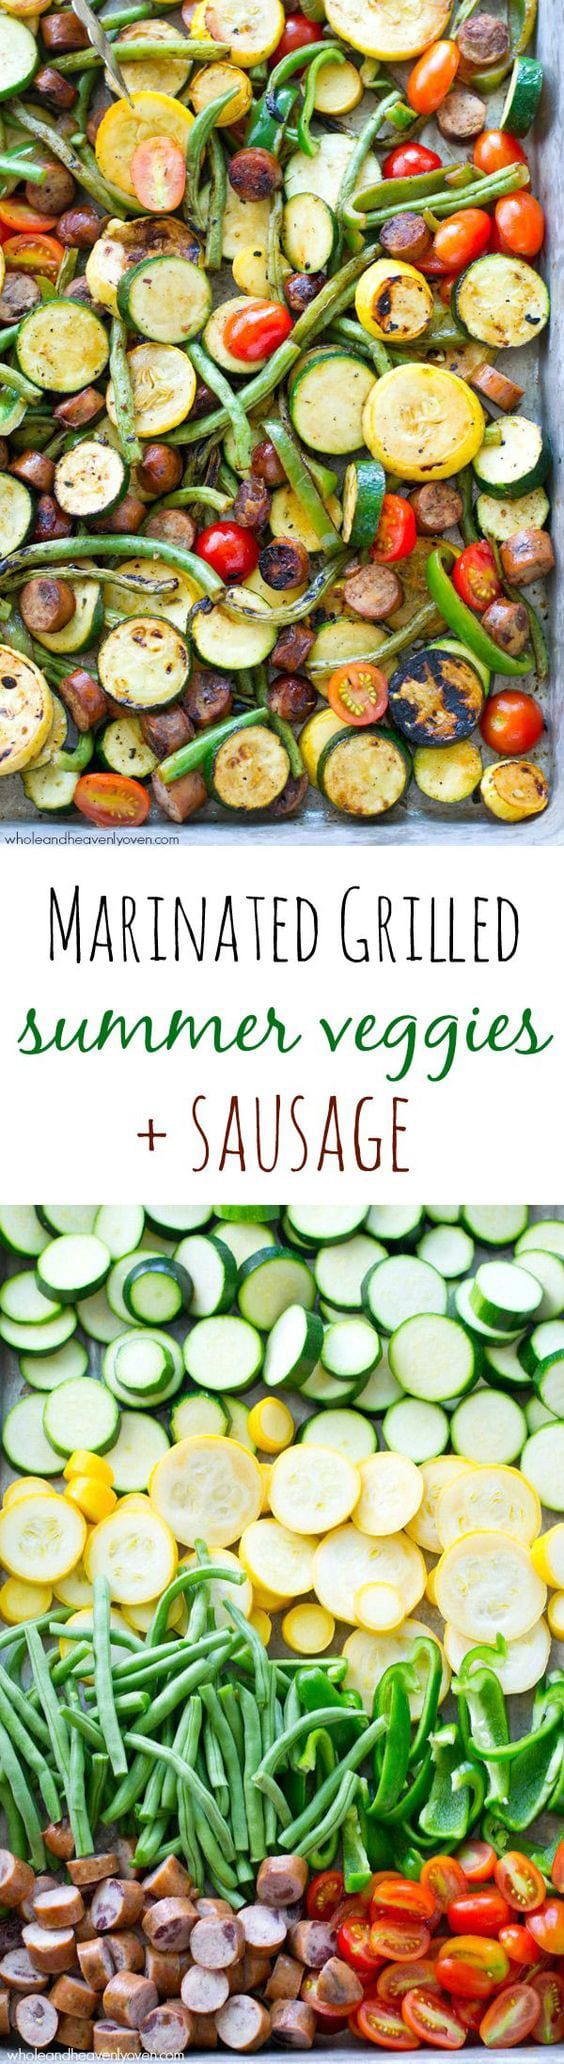 Marinated Grilled Summer Veggies with Sausage